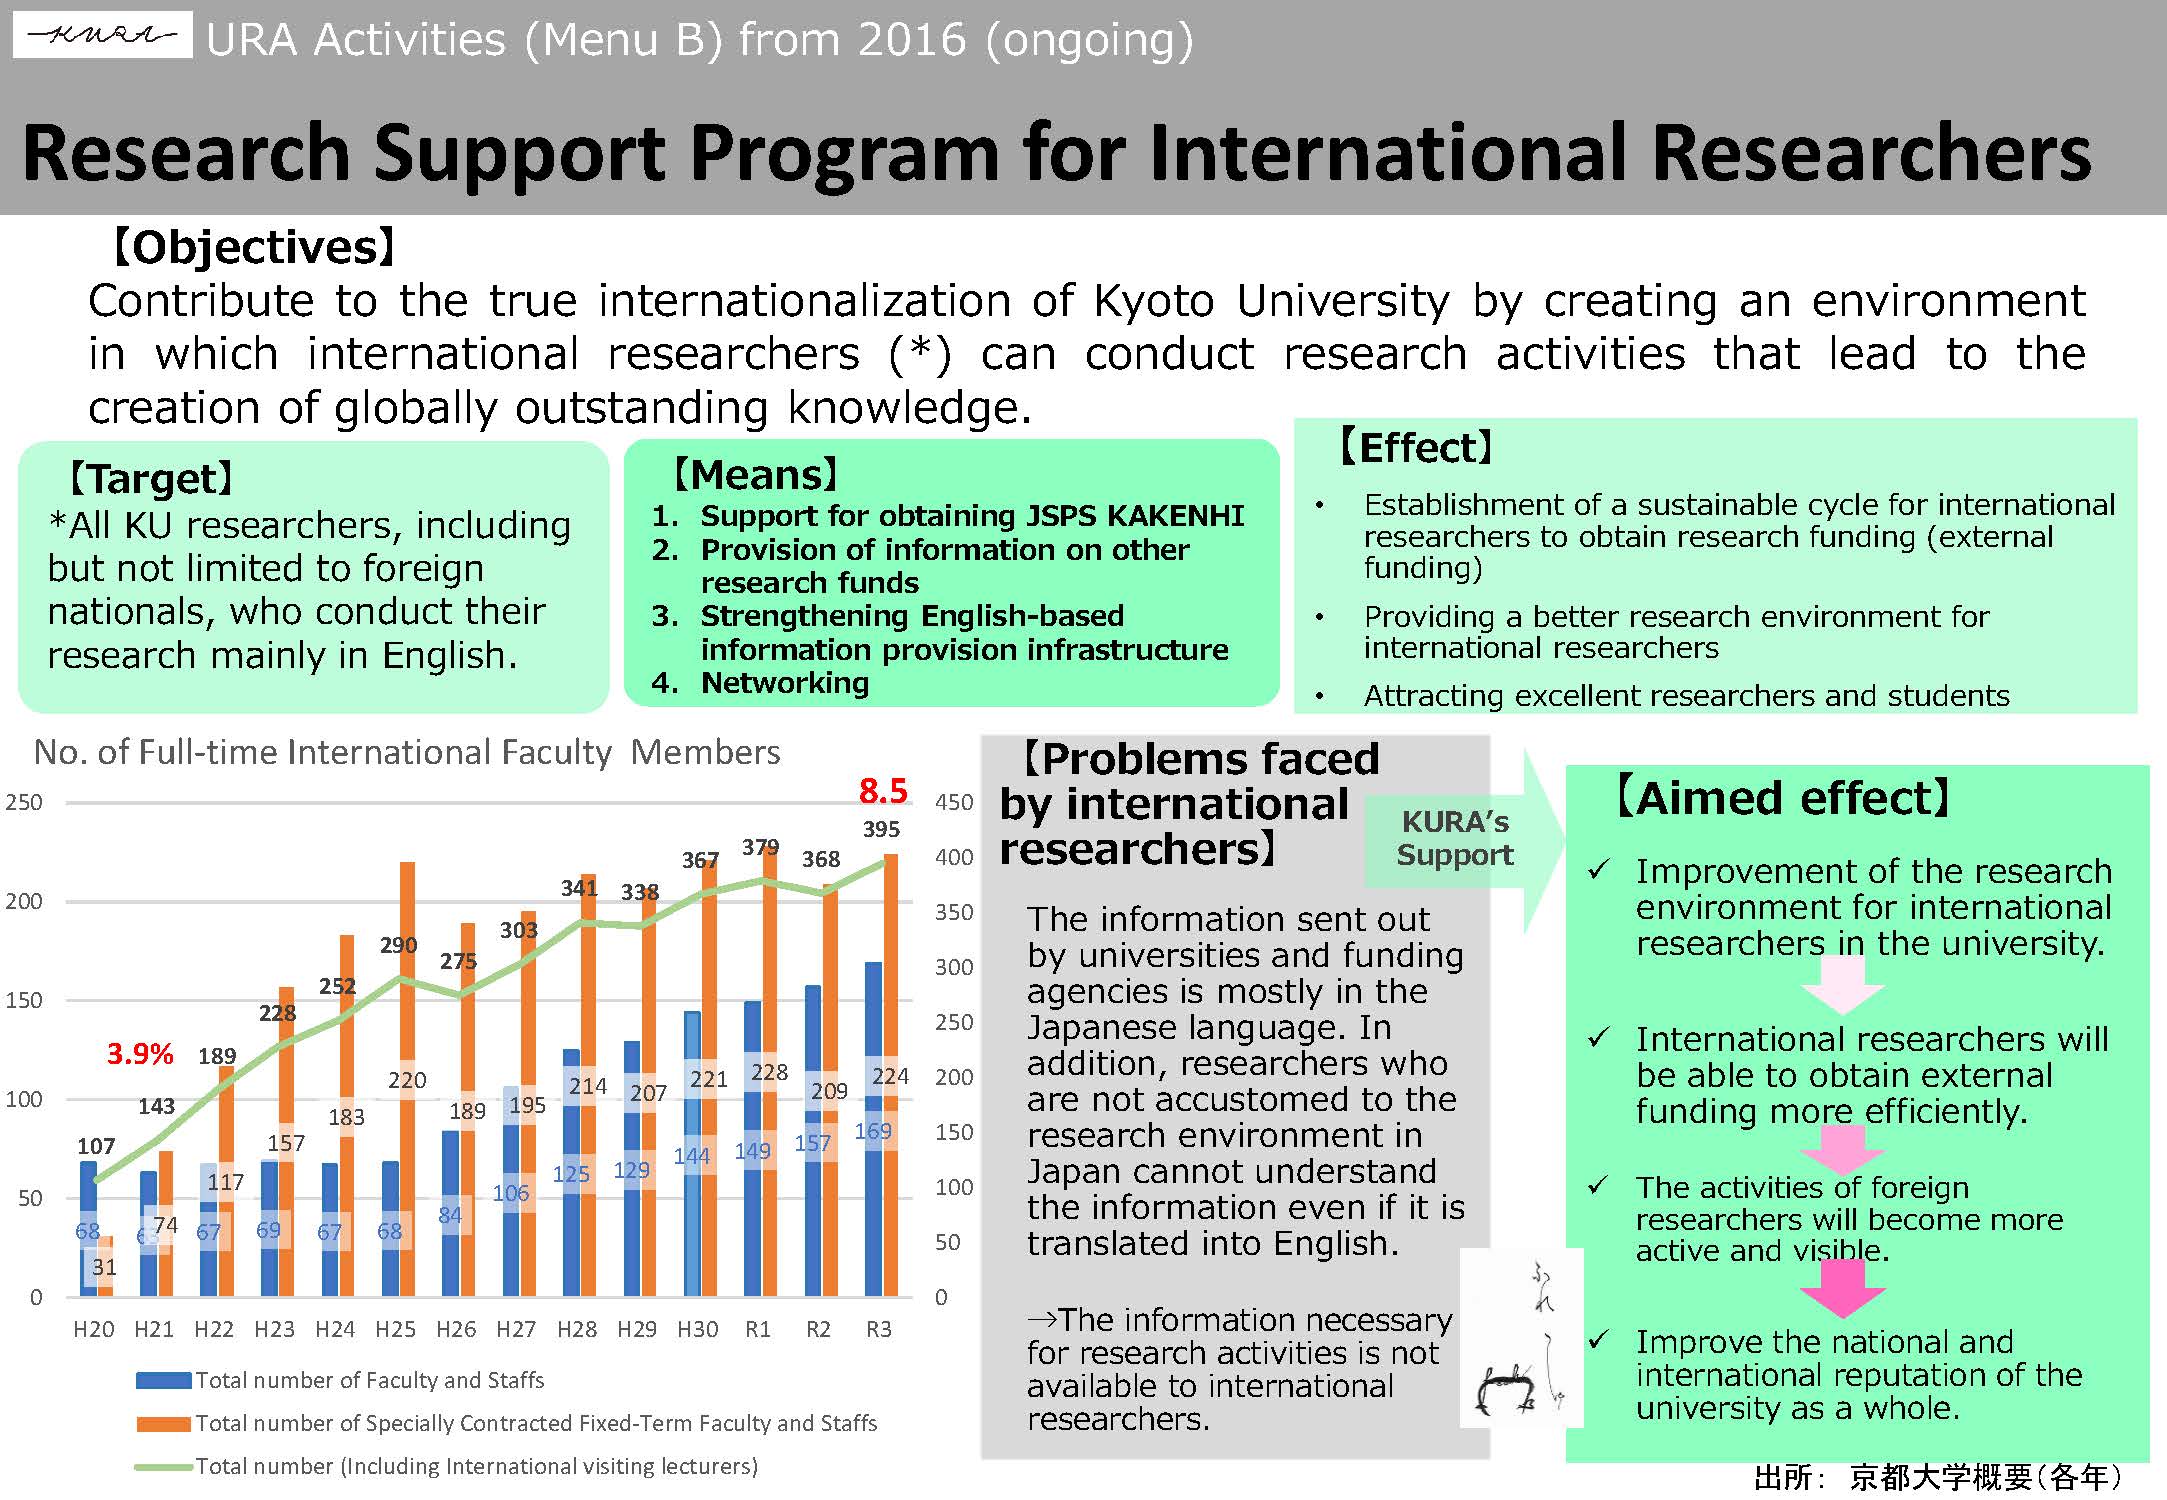 Research Support Program for International Researchers